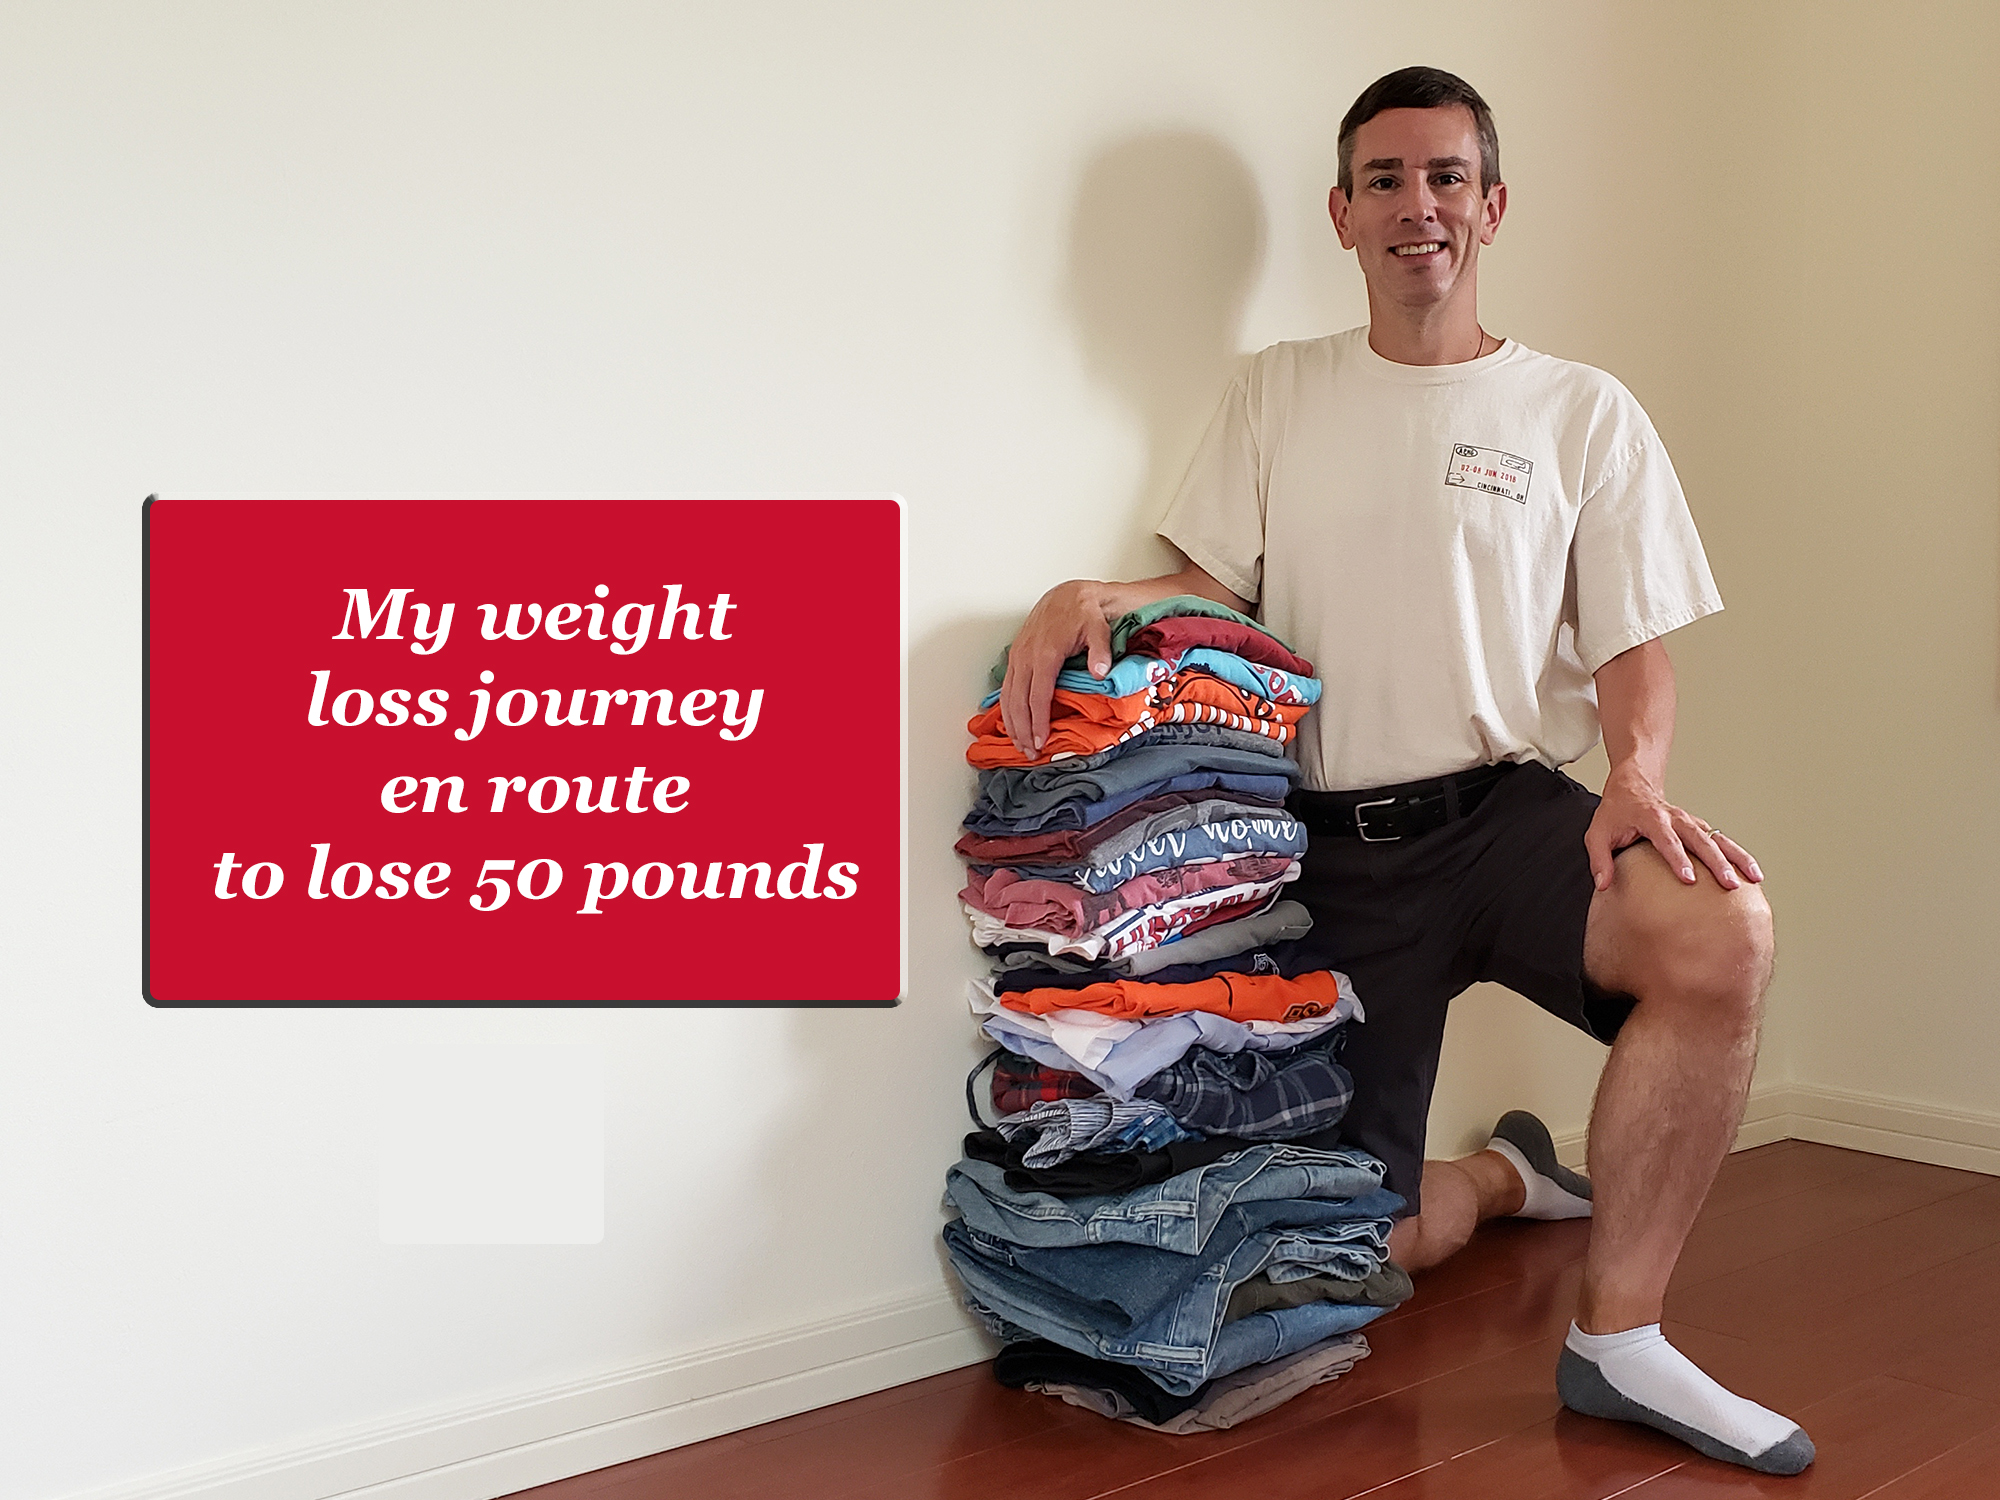 A man kneels next to a stack over-sized clothes with a text box to the left that says "My weight loss journey en rote to lose 50 pounds."